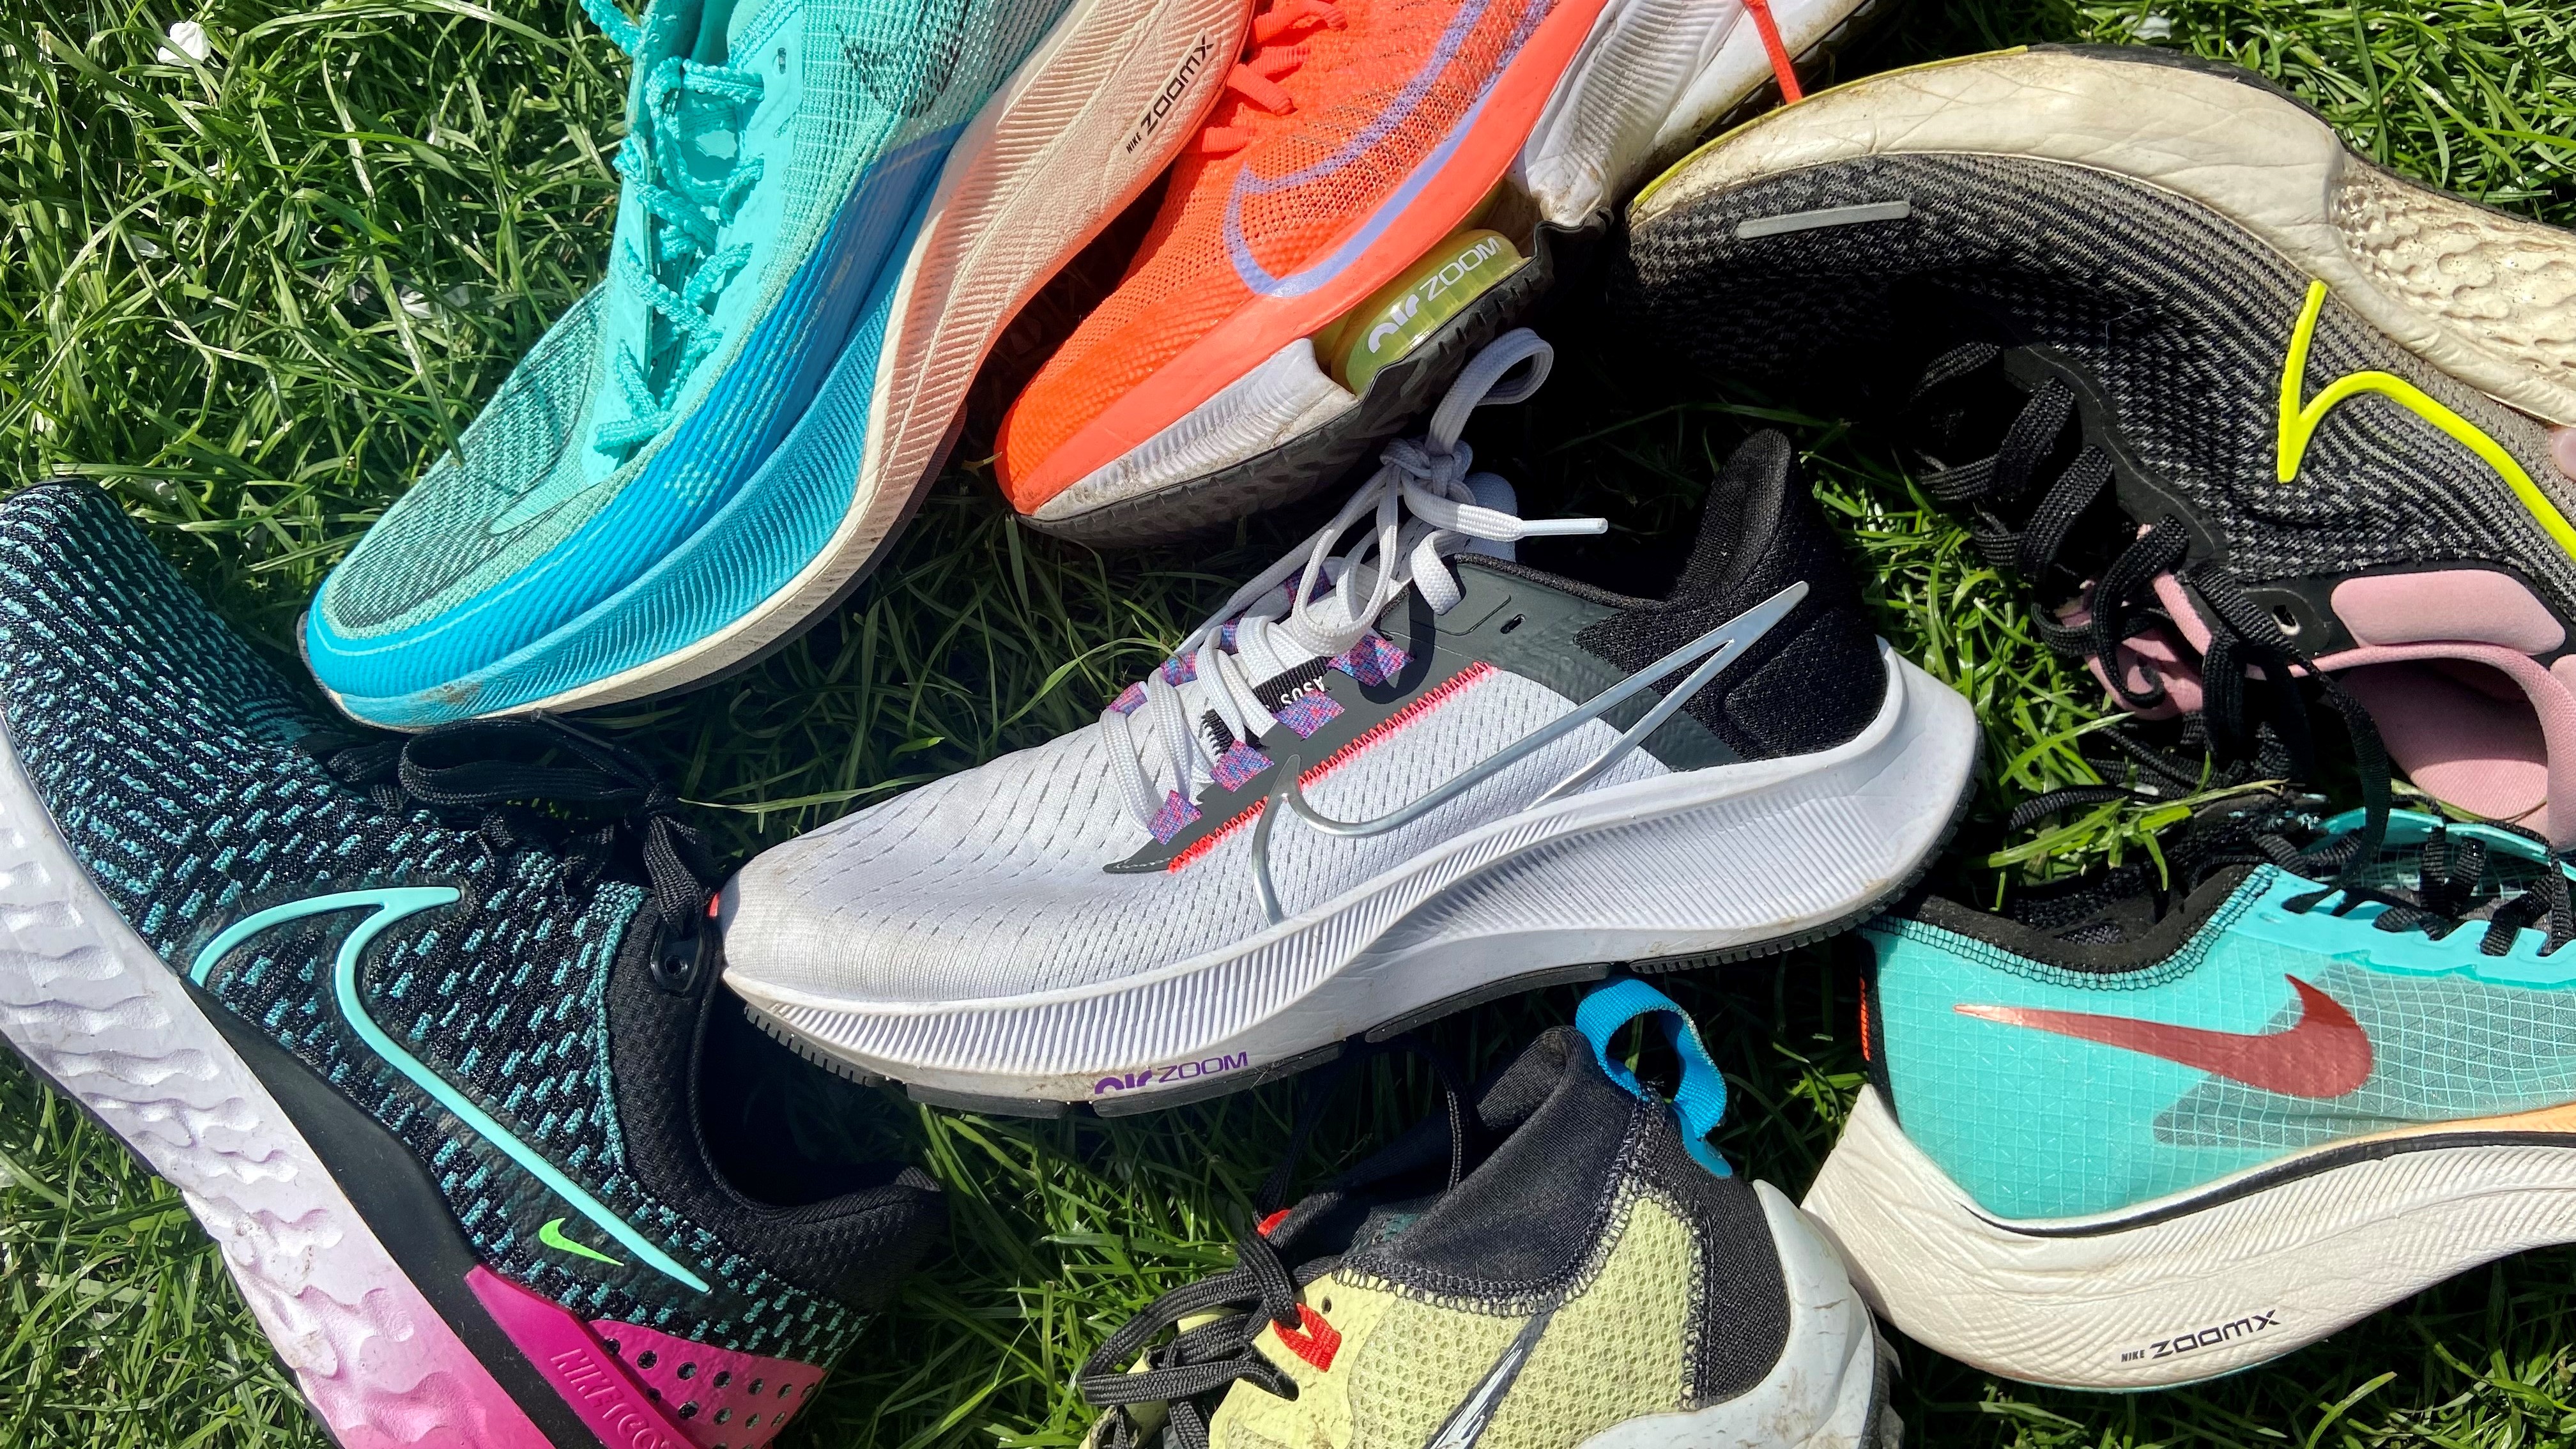 NEW NIKE RUNNING SHOES - Vaporfly Next% 3, Dragonfly XC & More! - YouTube